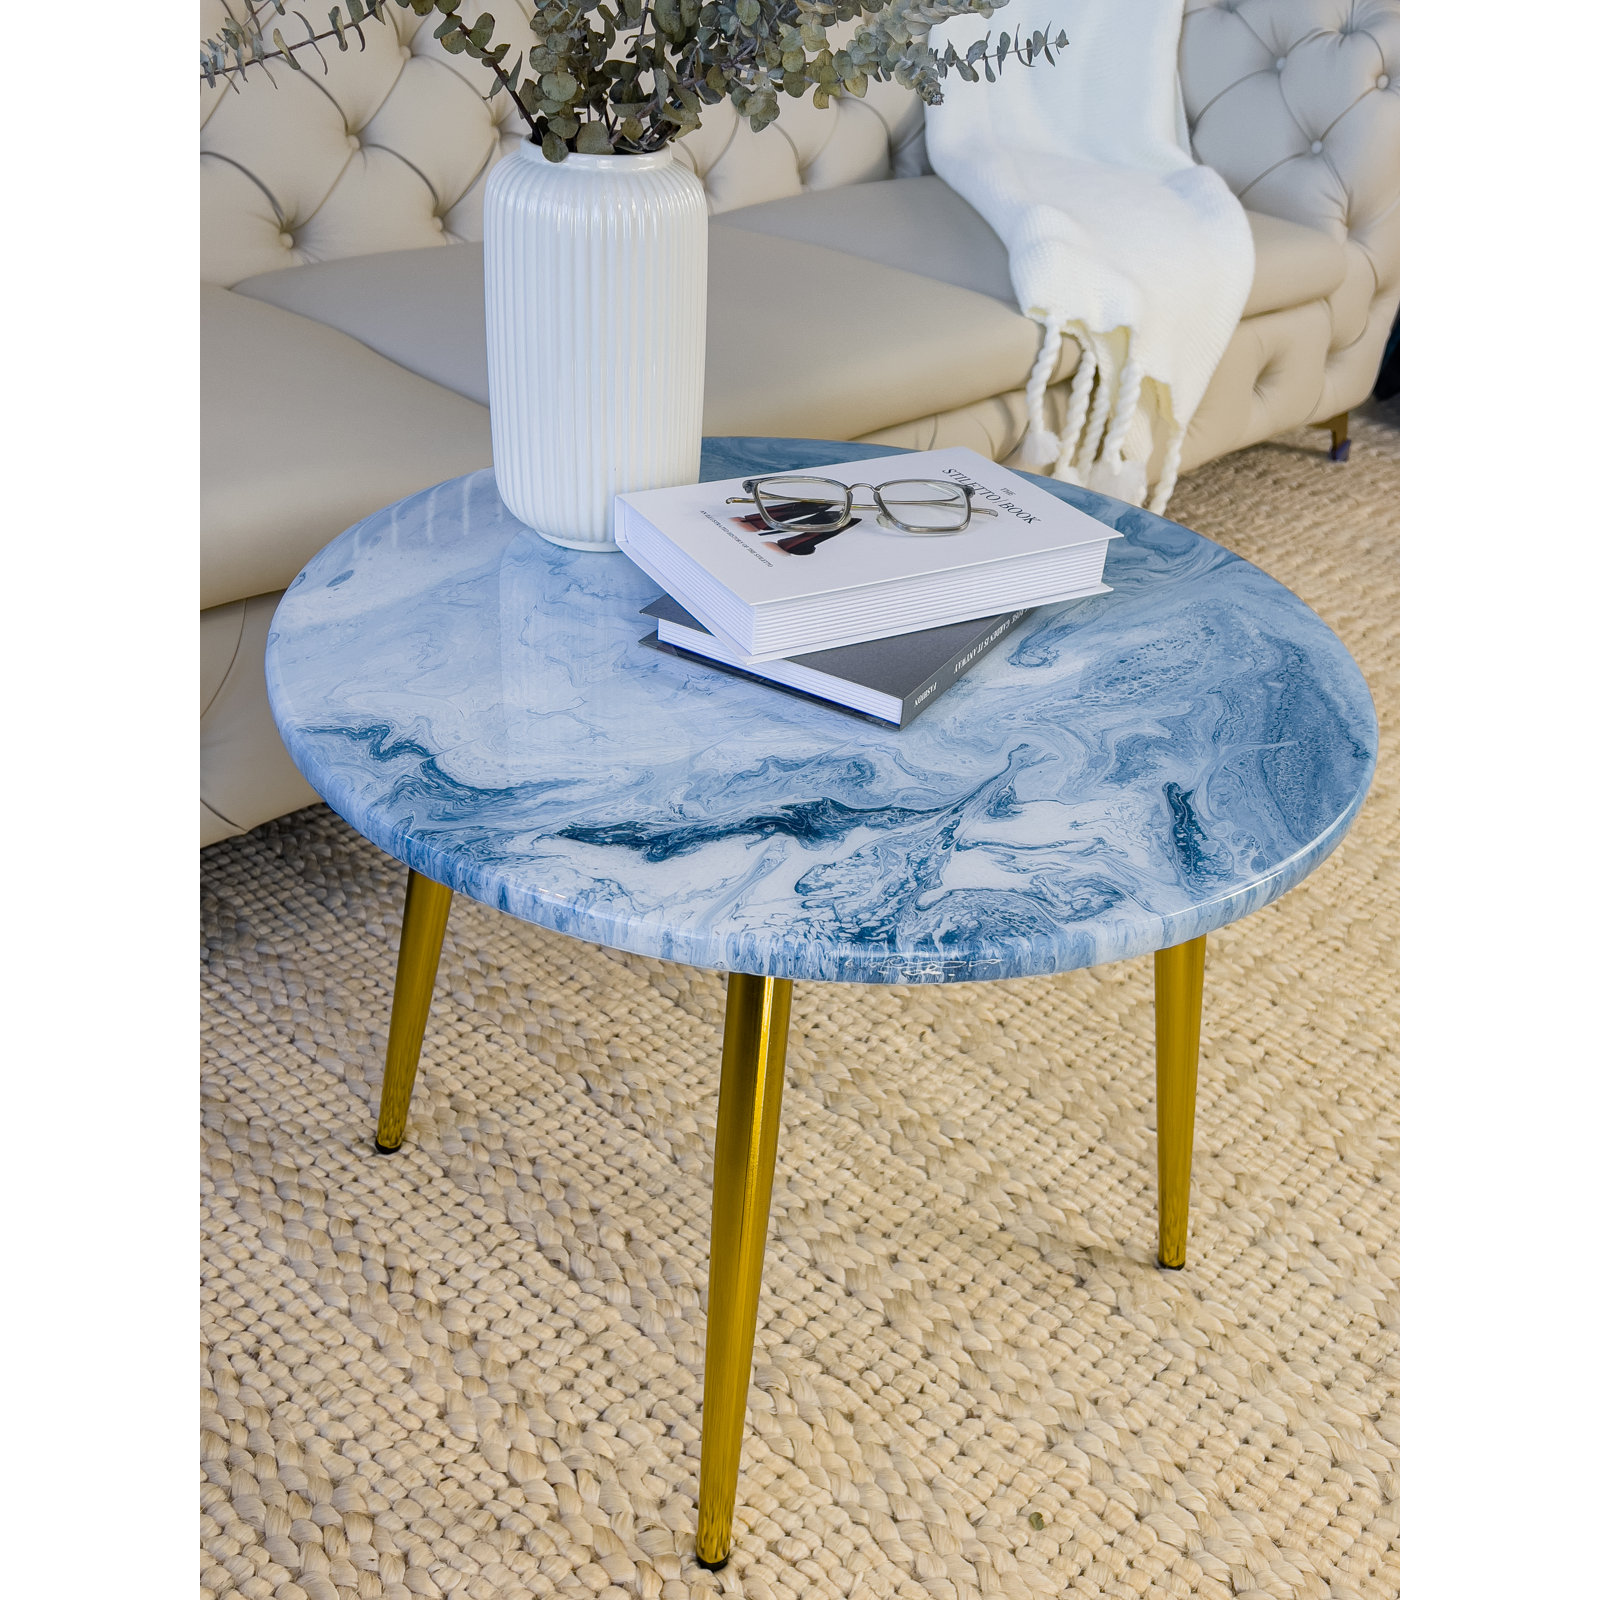 Everly Quinn Londell Coffee Table